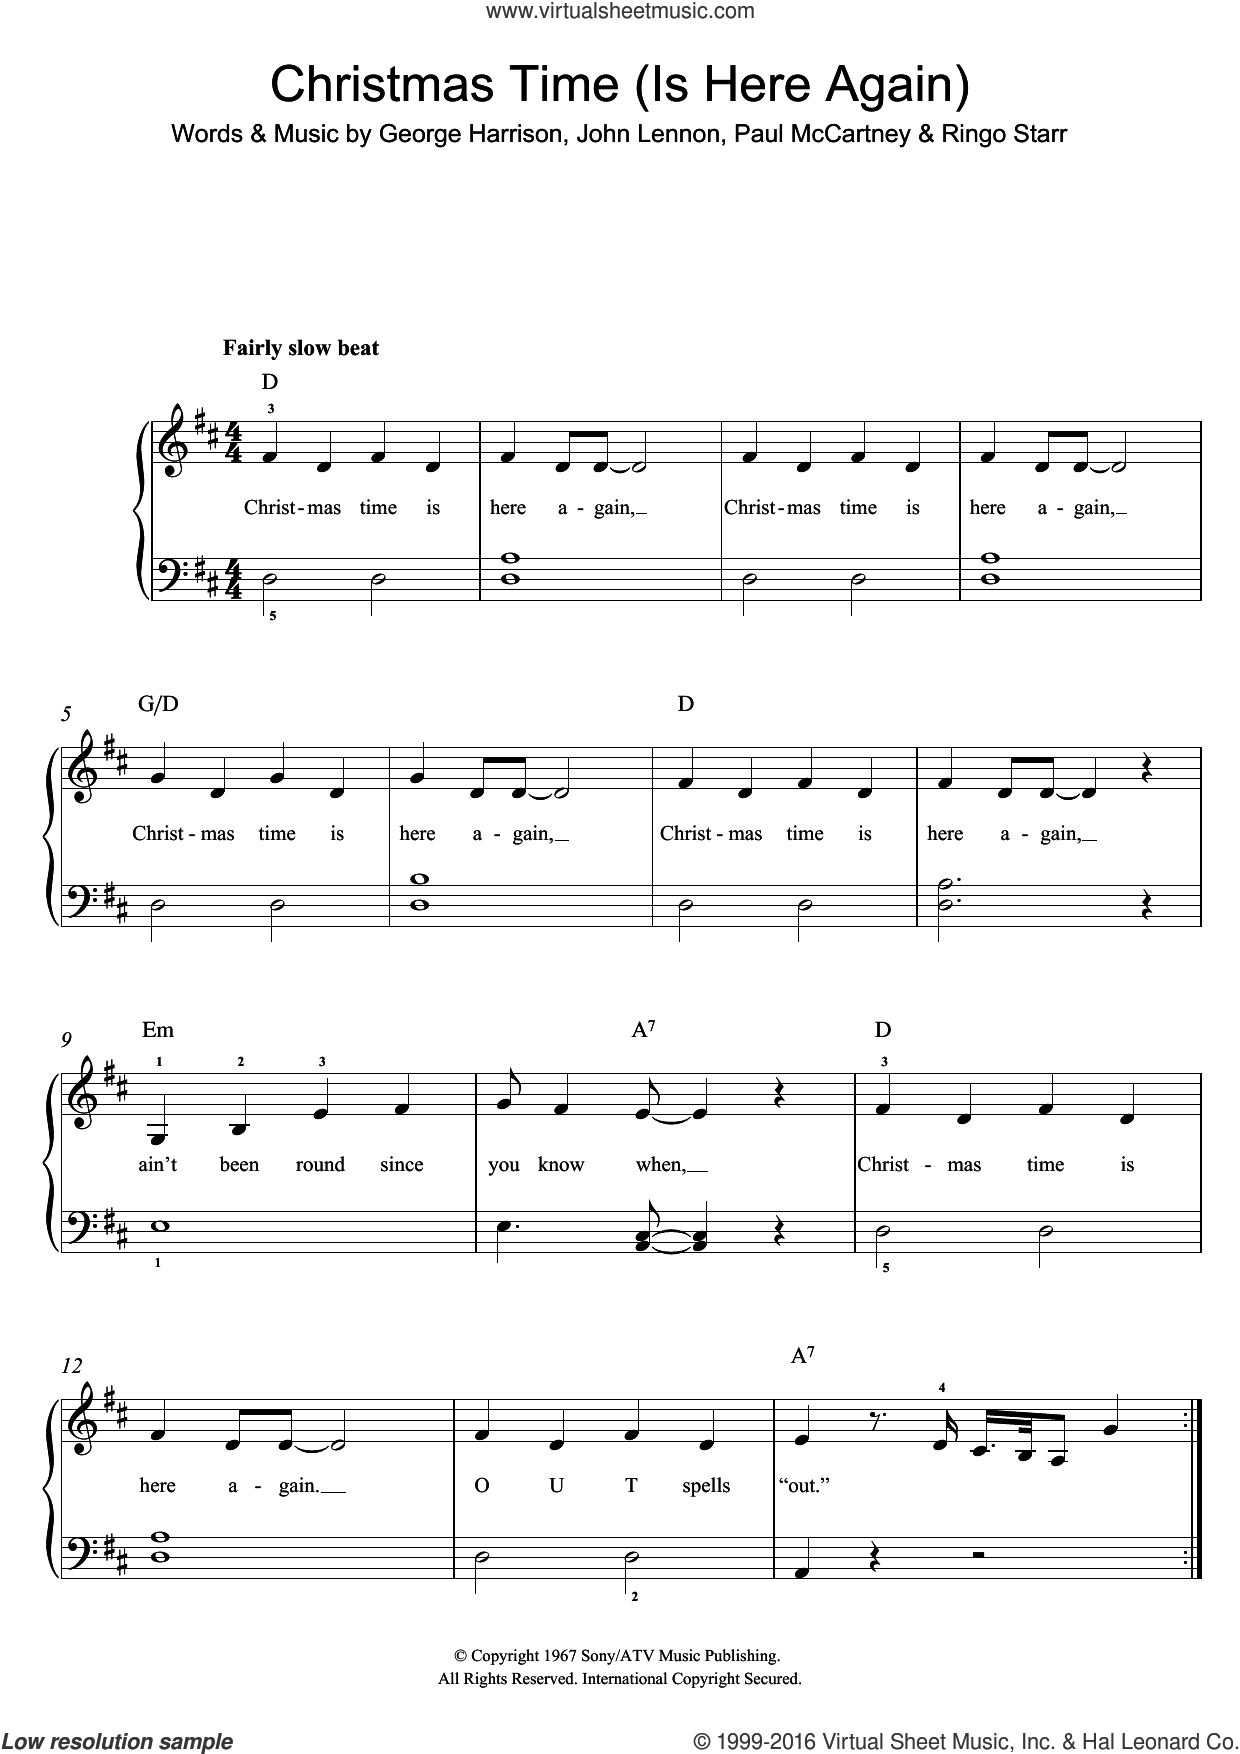 Beatles - Christmas Time (Is Here Again), (easy) sheet music for piano solo